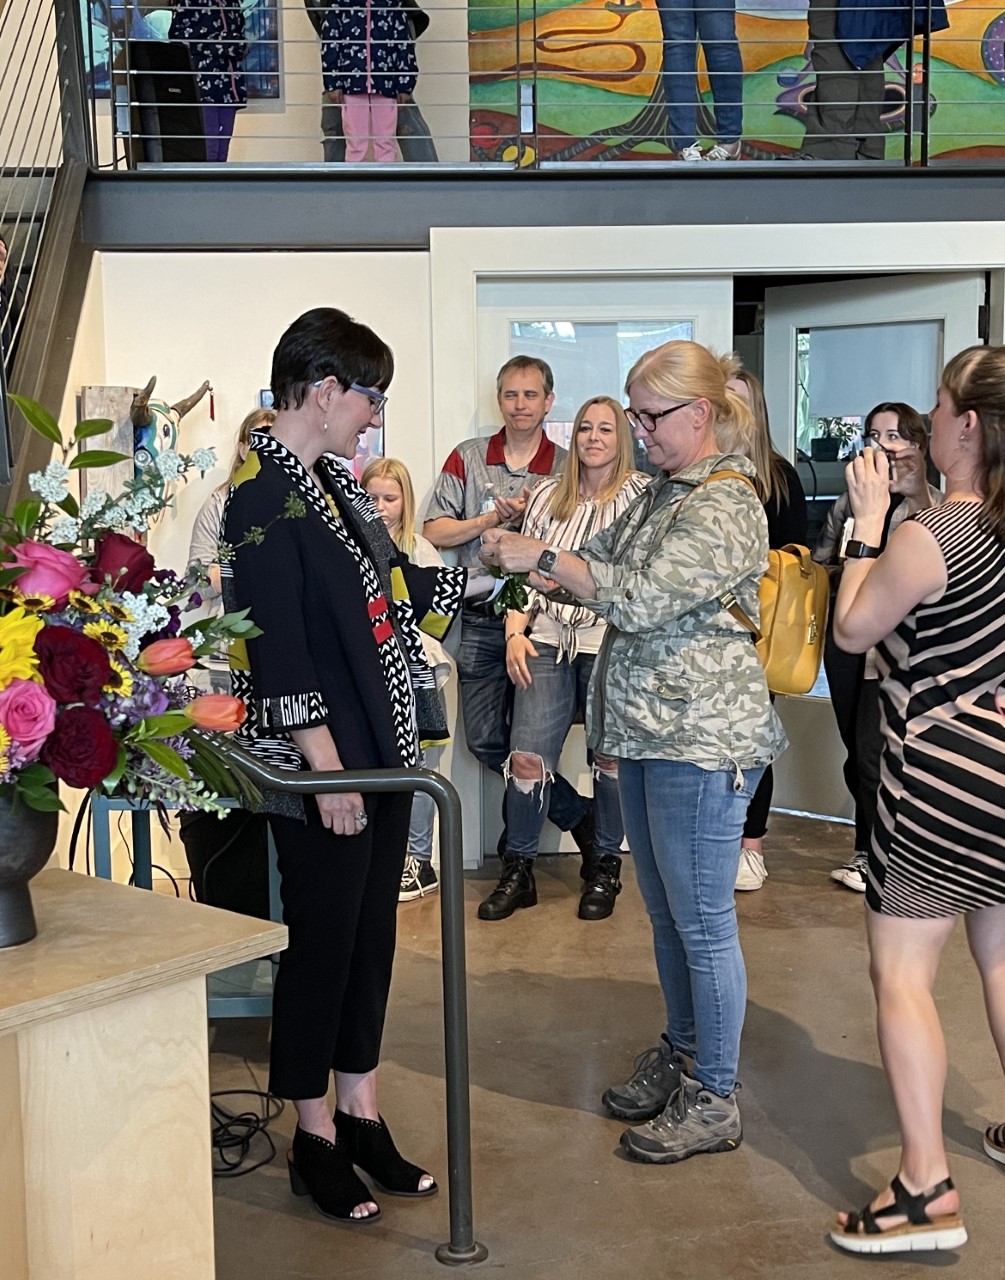 Ellensburg Poet Laureate Marie Marchand receives a laurel wreath from Arts Commissioner Cassandra Town at an installment ceremony at Gallery One on June 2, 2022. Photo by Steve Van Ausdall.